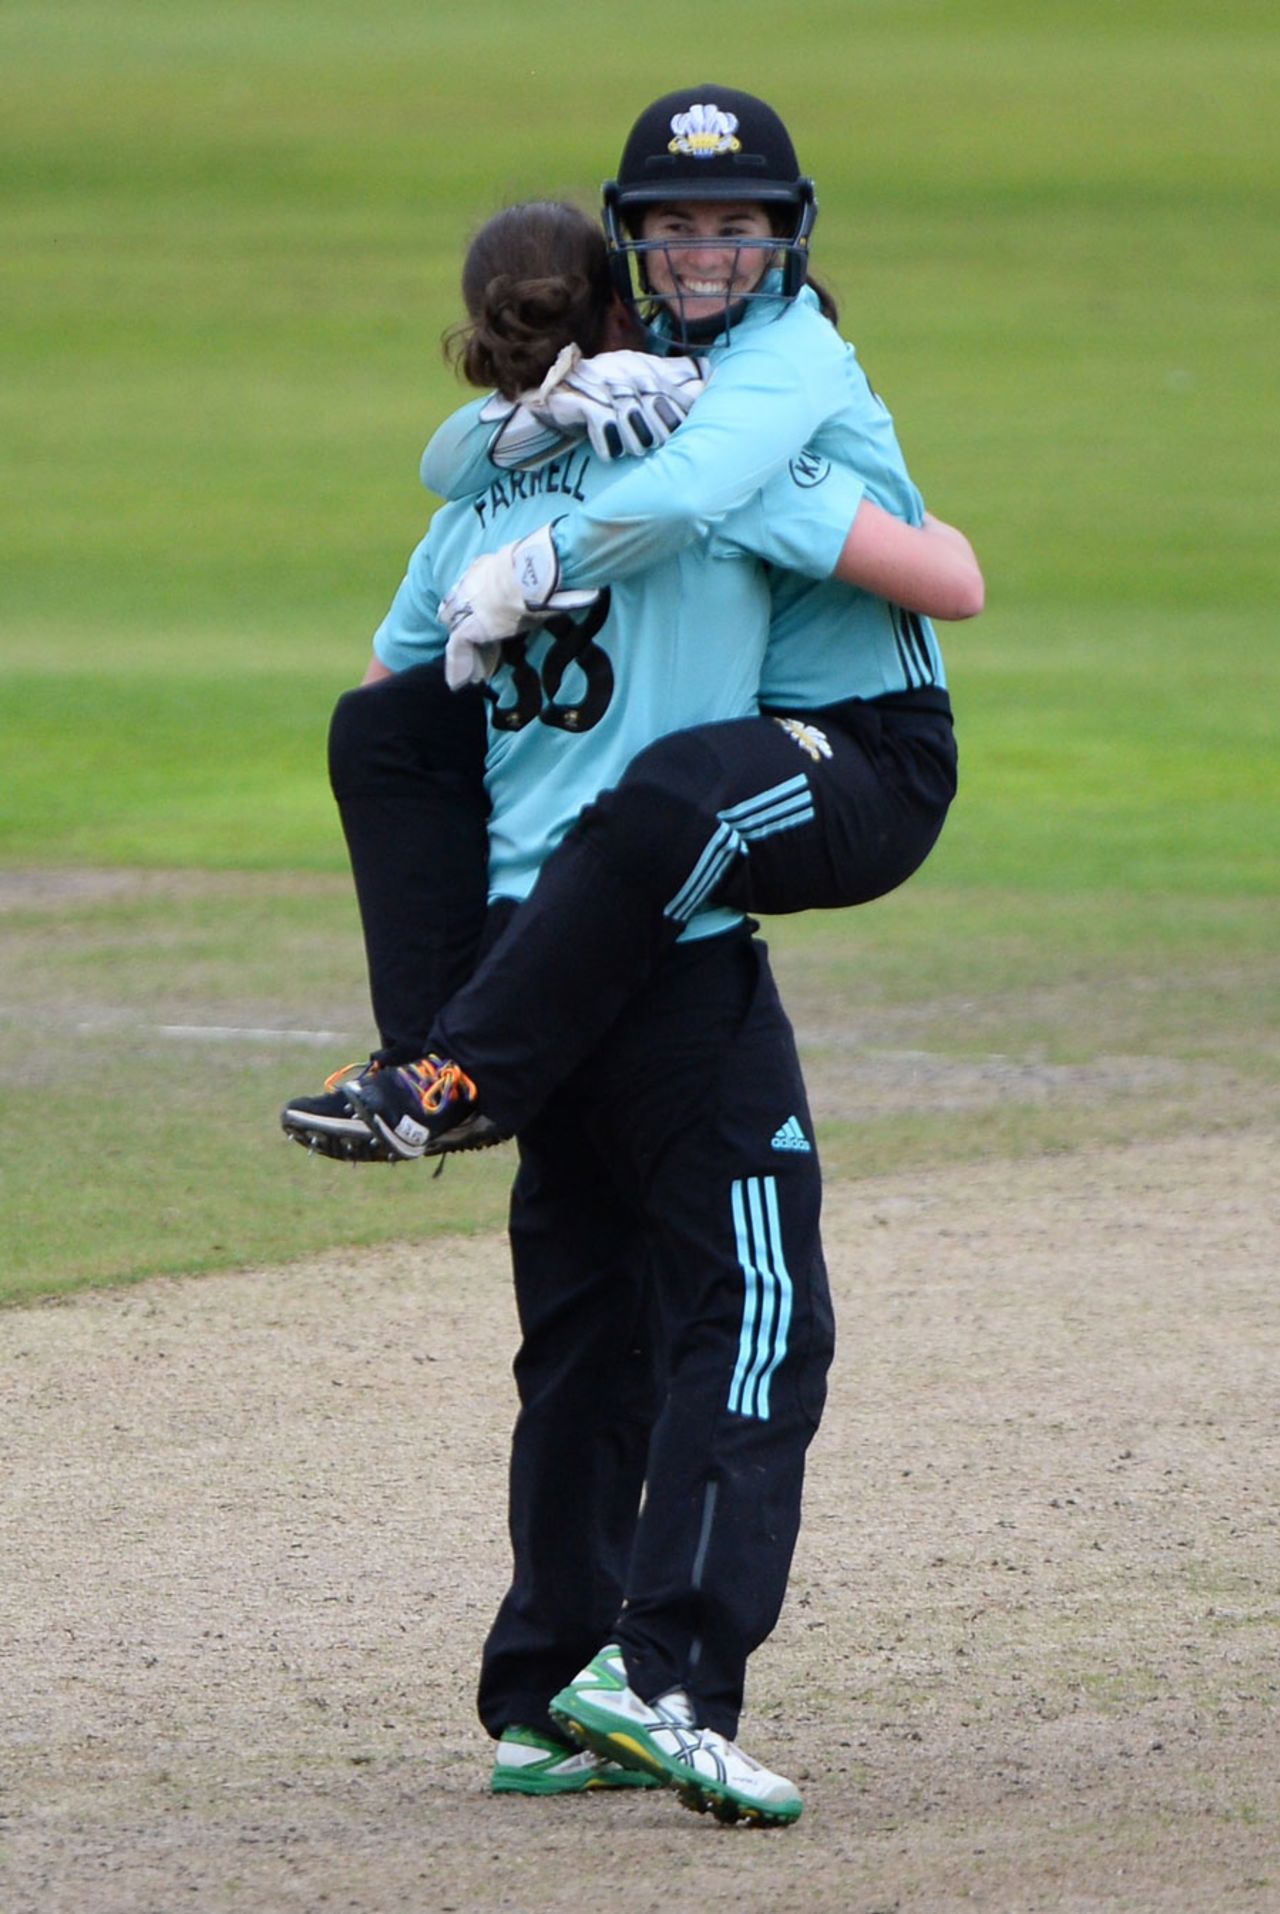 Rene Farrell gets a hug from Tammy Beaumont after sealing victory, Lancashire Thunder v Surrey Stars, Kia Super League, Old Trafford, August 16, 2017